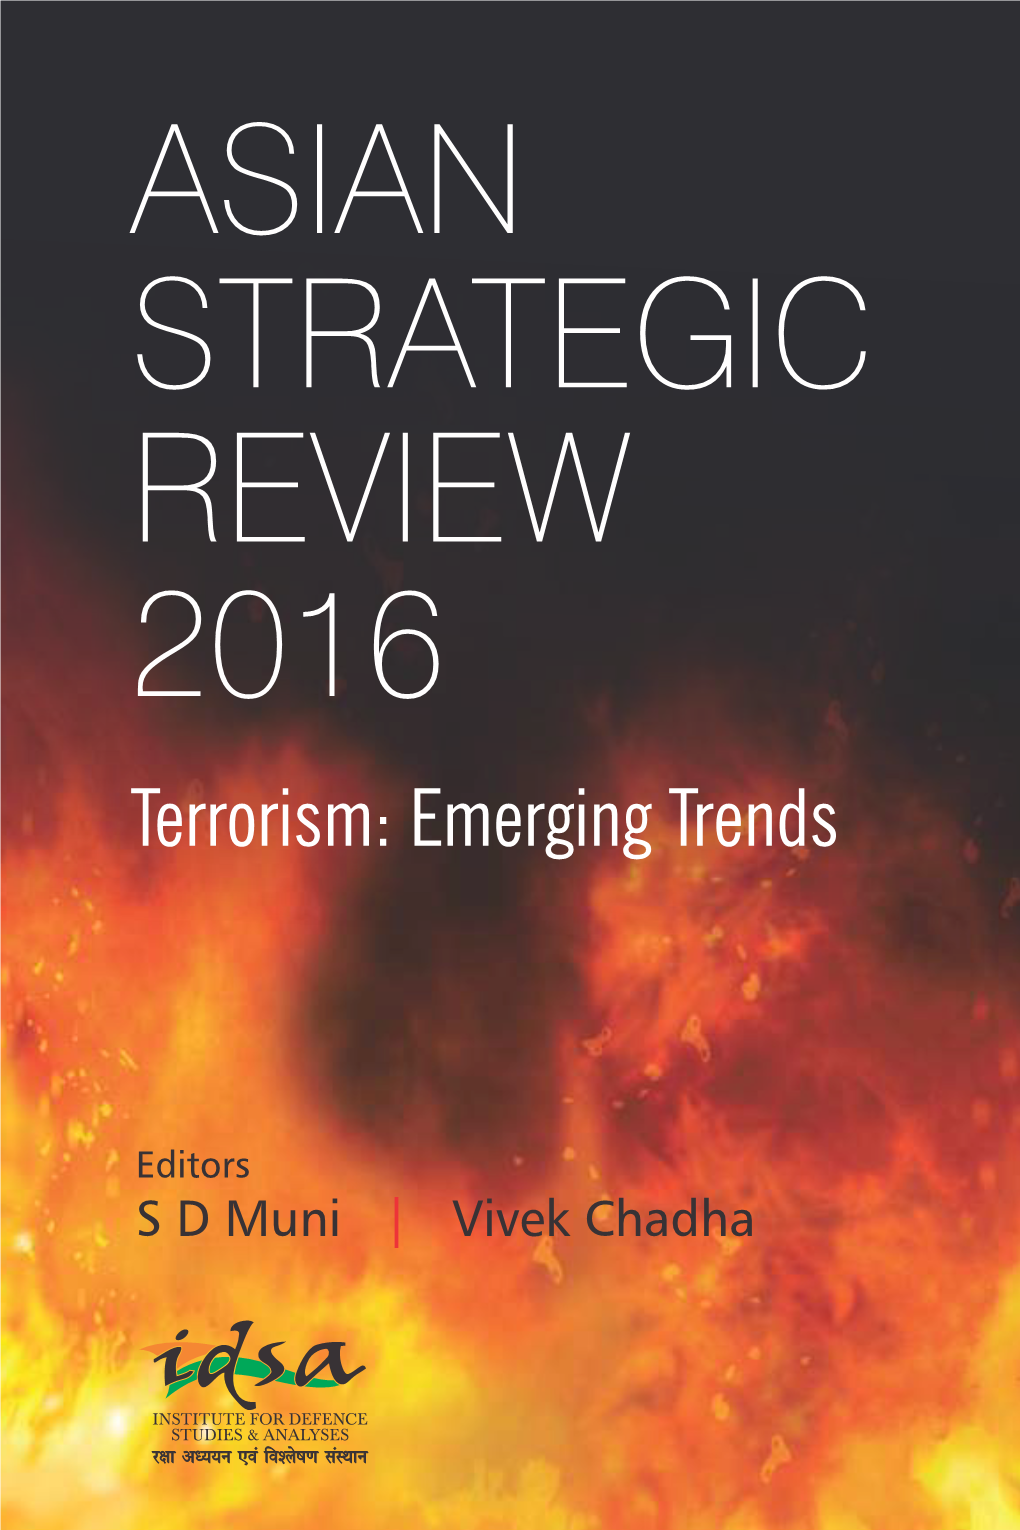 Asian Strategic Review 2016 Editors Muni • Chadha 5 3 8 8 4 7 2 Eforms 8 ` 995 1 8 8 7 9 ISBN 978-81-8274-883-5 Ractices